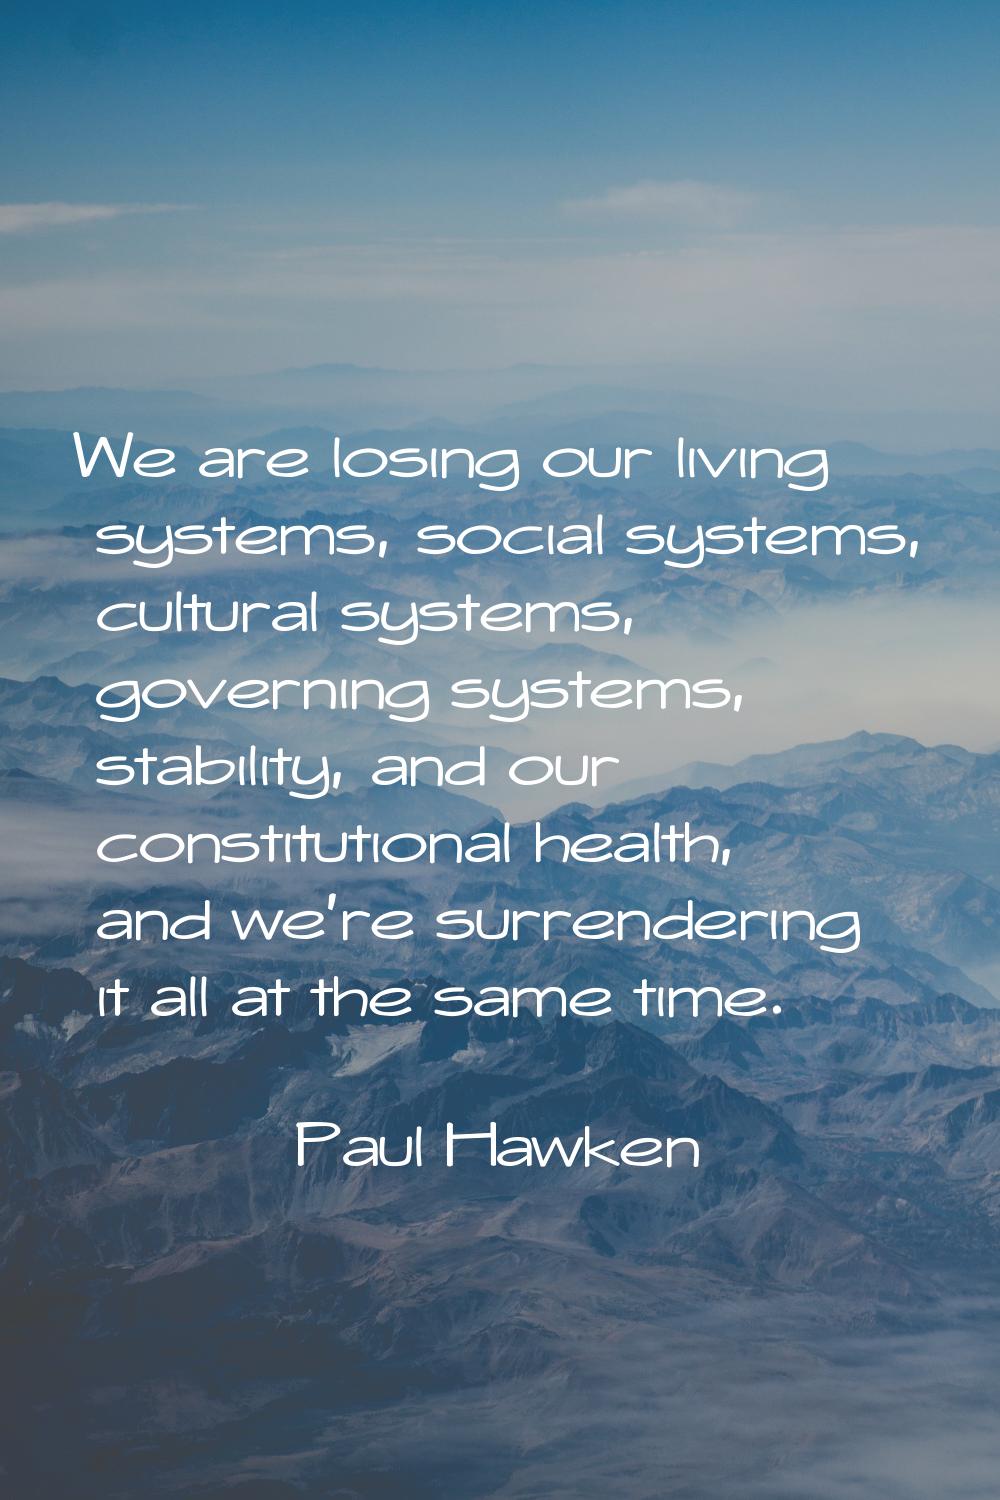 We are losing our living systems, social systems, cultural systems, governing systems, stability, a